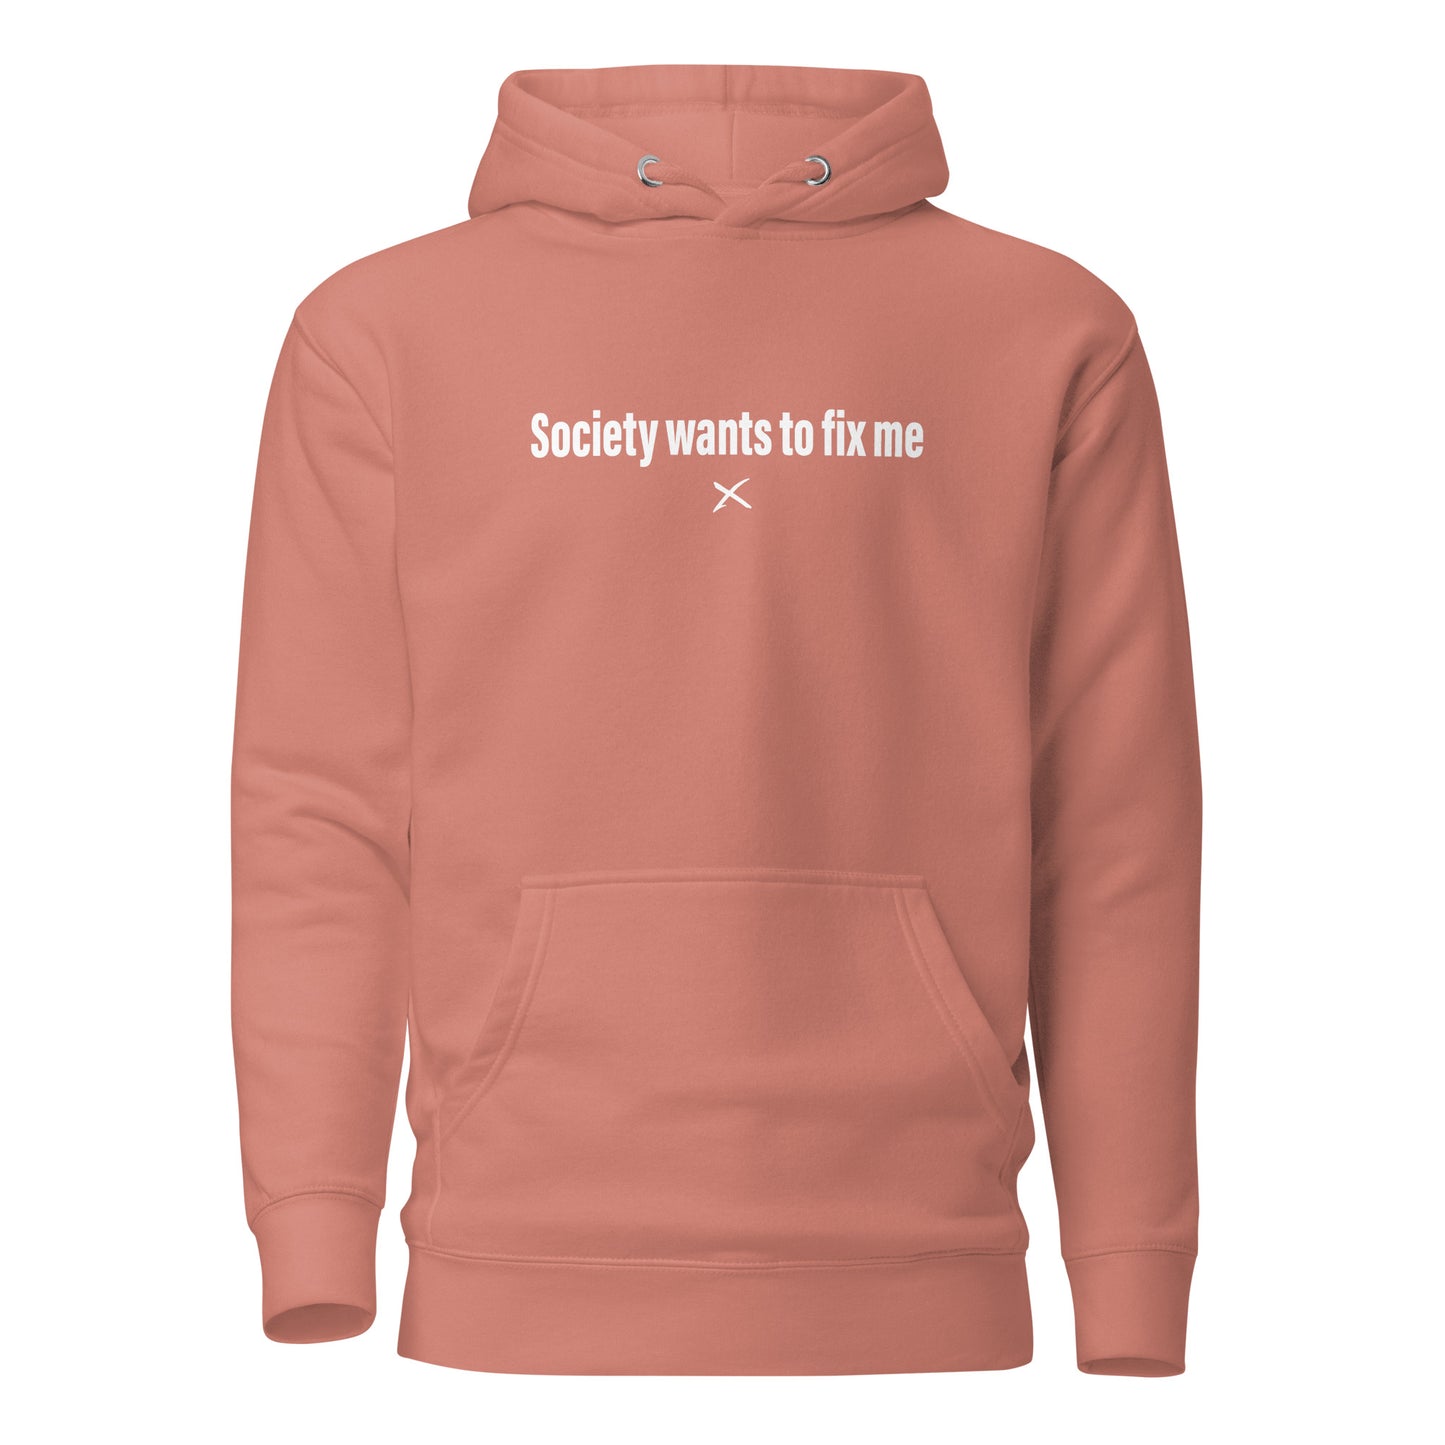 Society wants to fix me - Hoodie